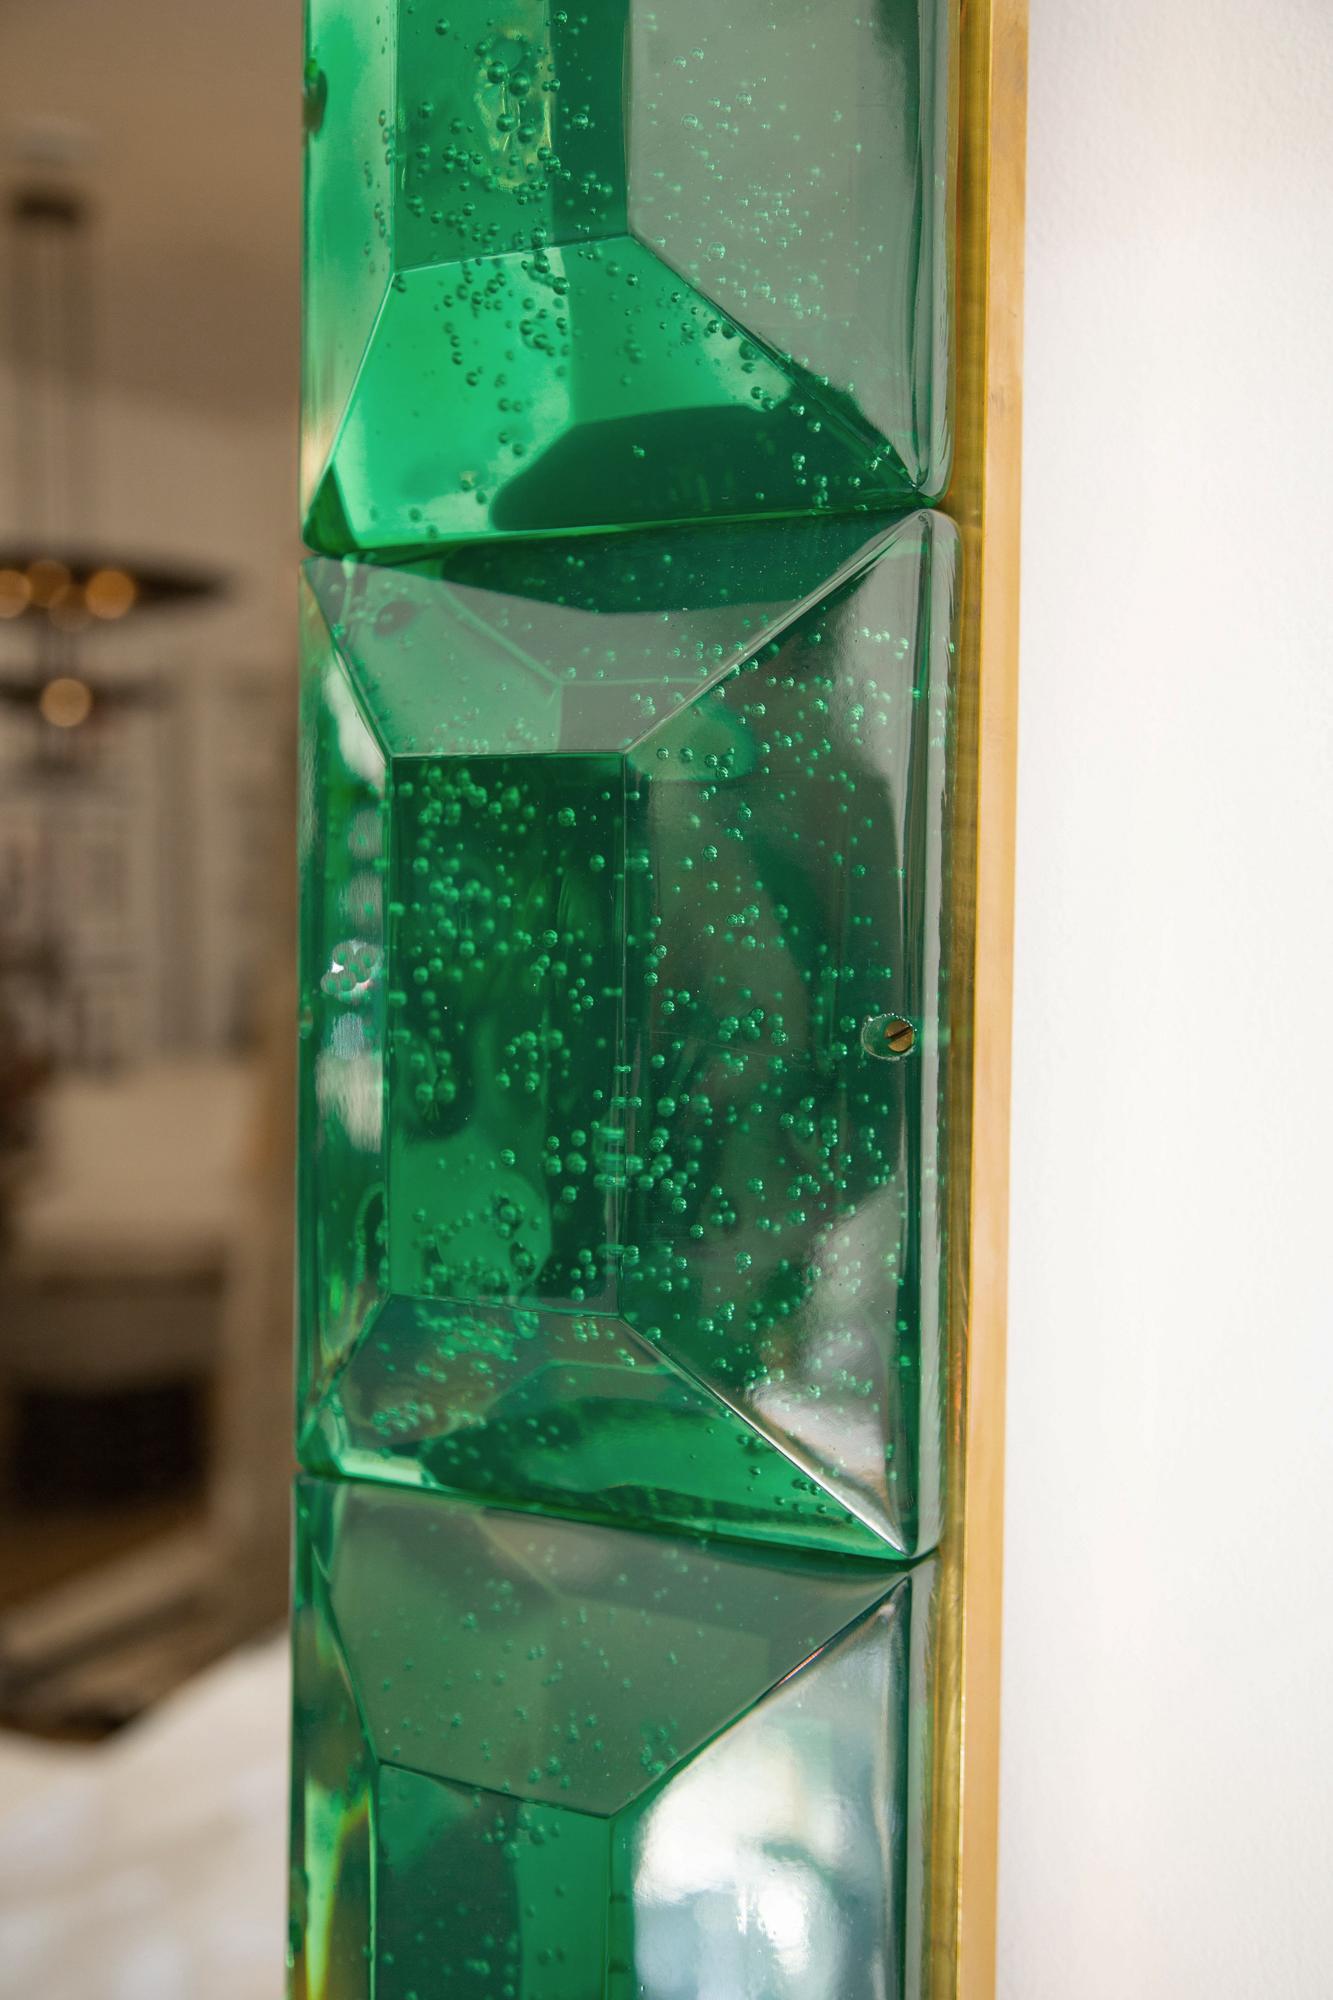 Pair of large emerald green diamond cut Murano glass mirrors. In stock.
 Vivid and intense emerald green glass block with naturally occurring air inclusions throughout 
 Highly polished faceted pattern
 Brass gallery
 Luxury handcrafted by a team of